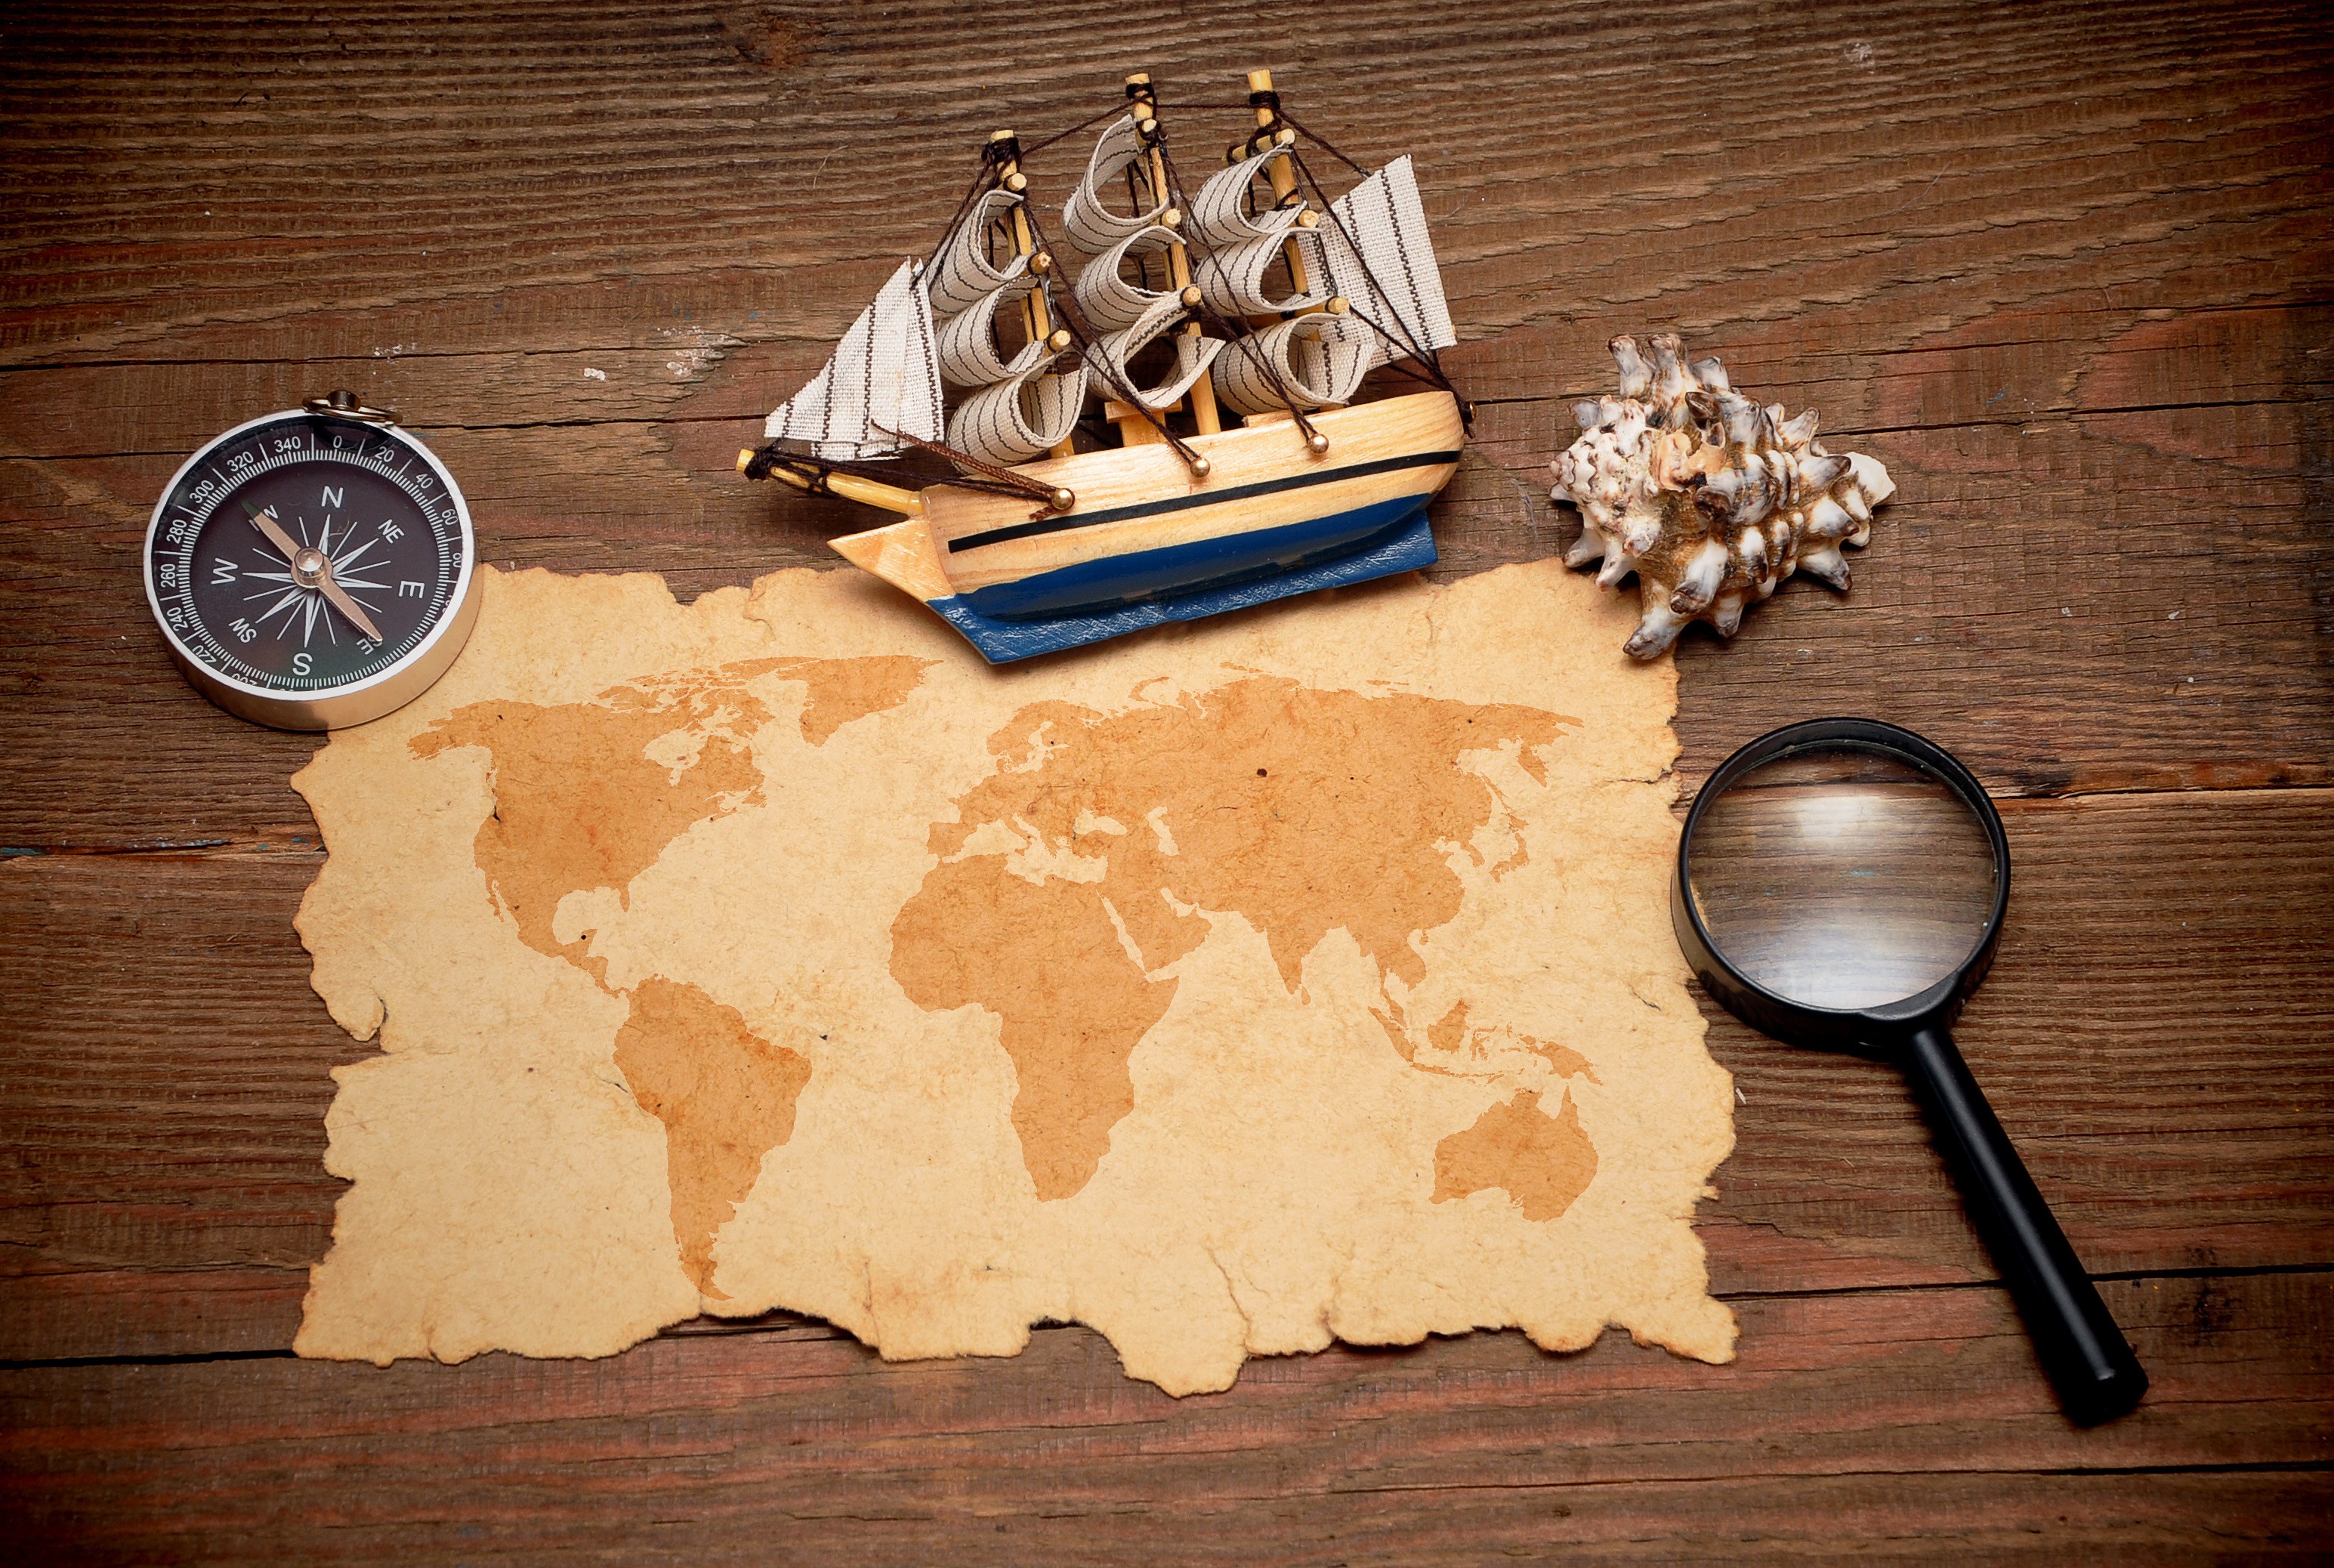 Wood Sailing Ship Magnifying Glasses Compass World Map Beige 3090x2076